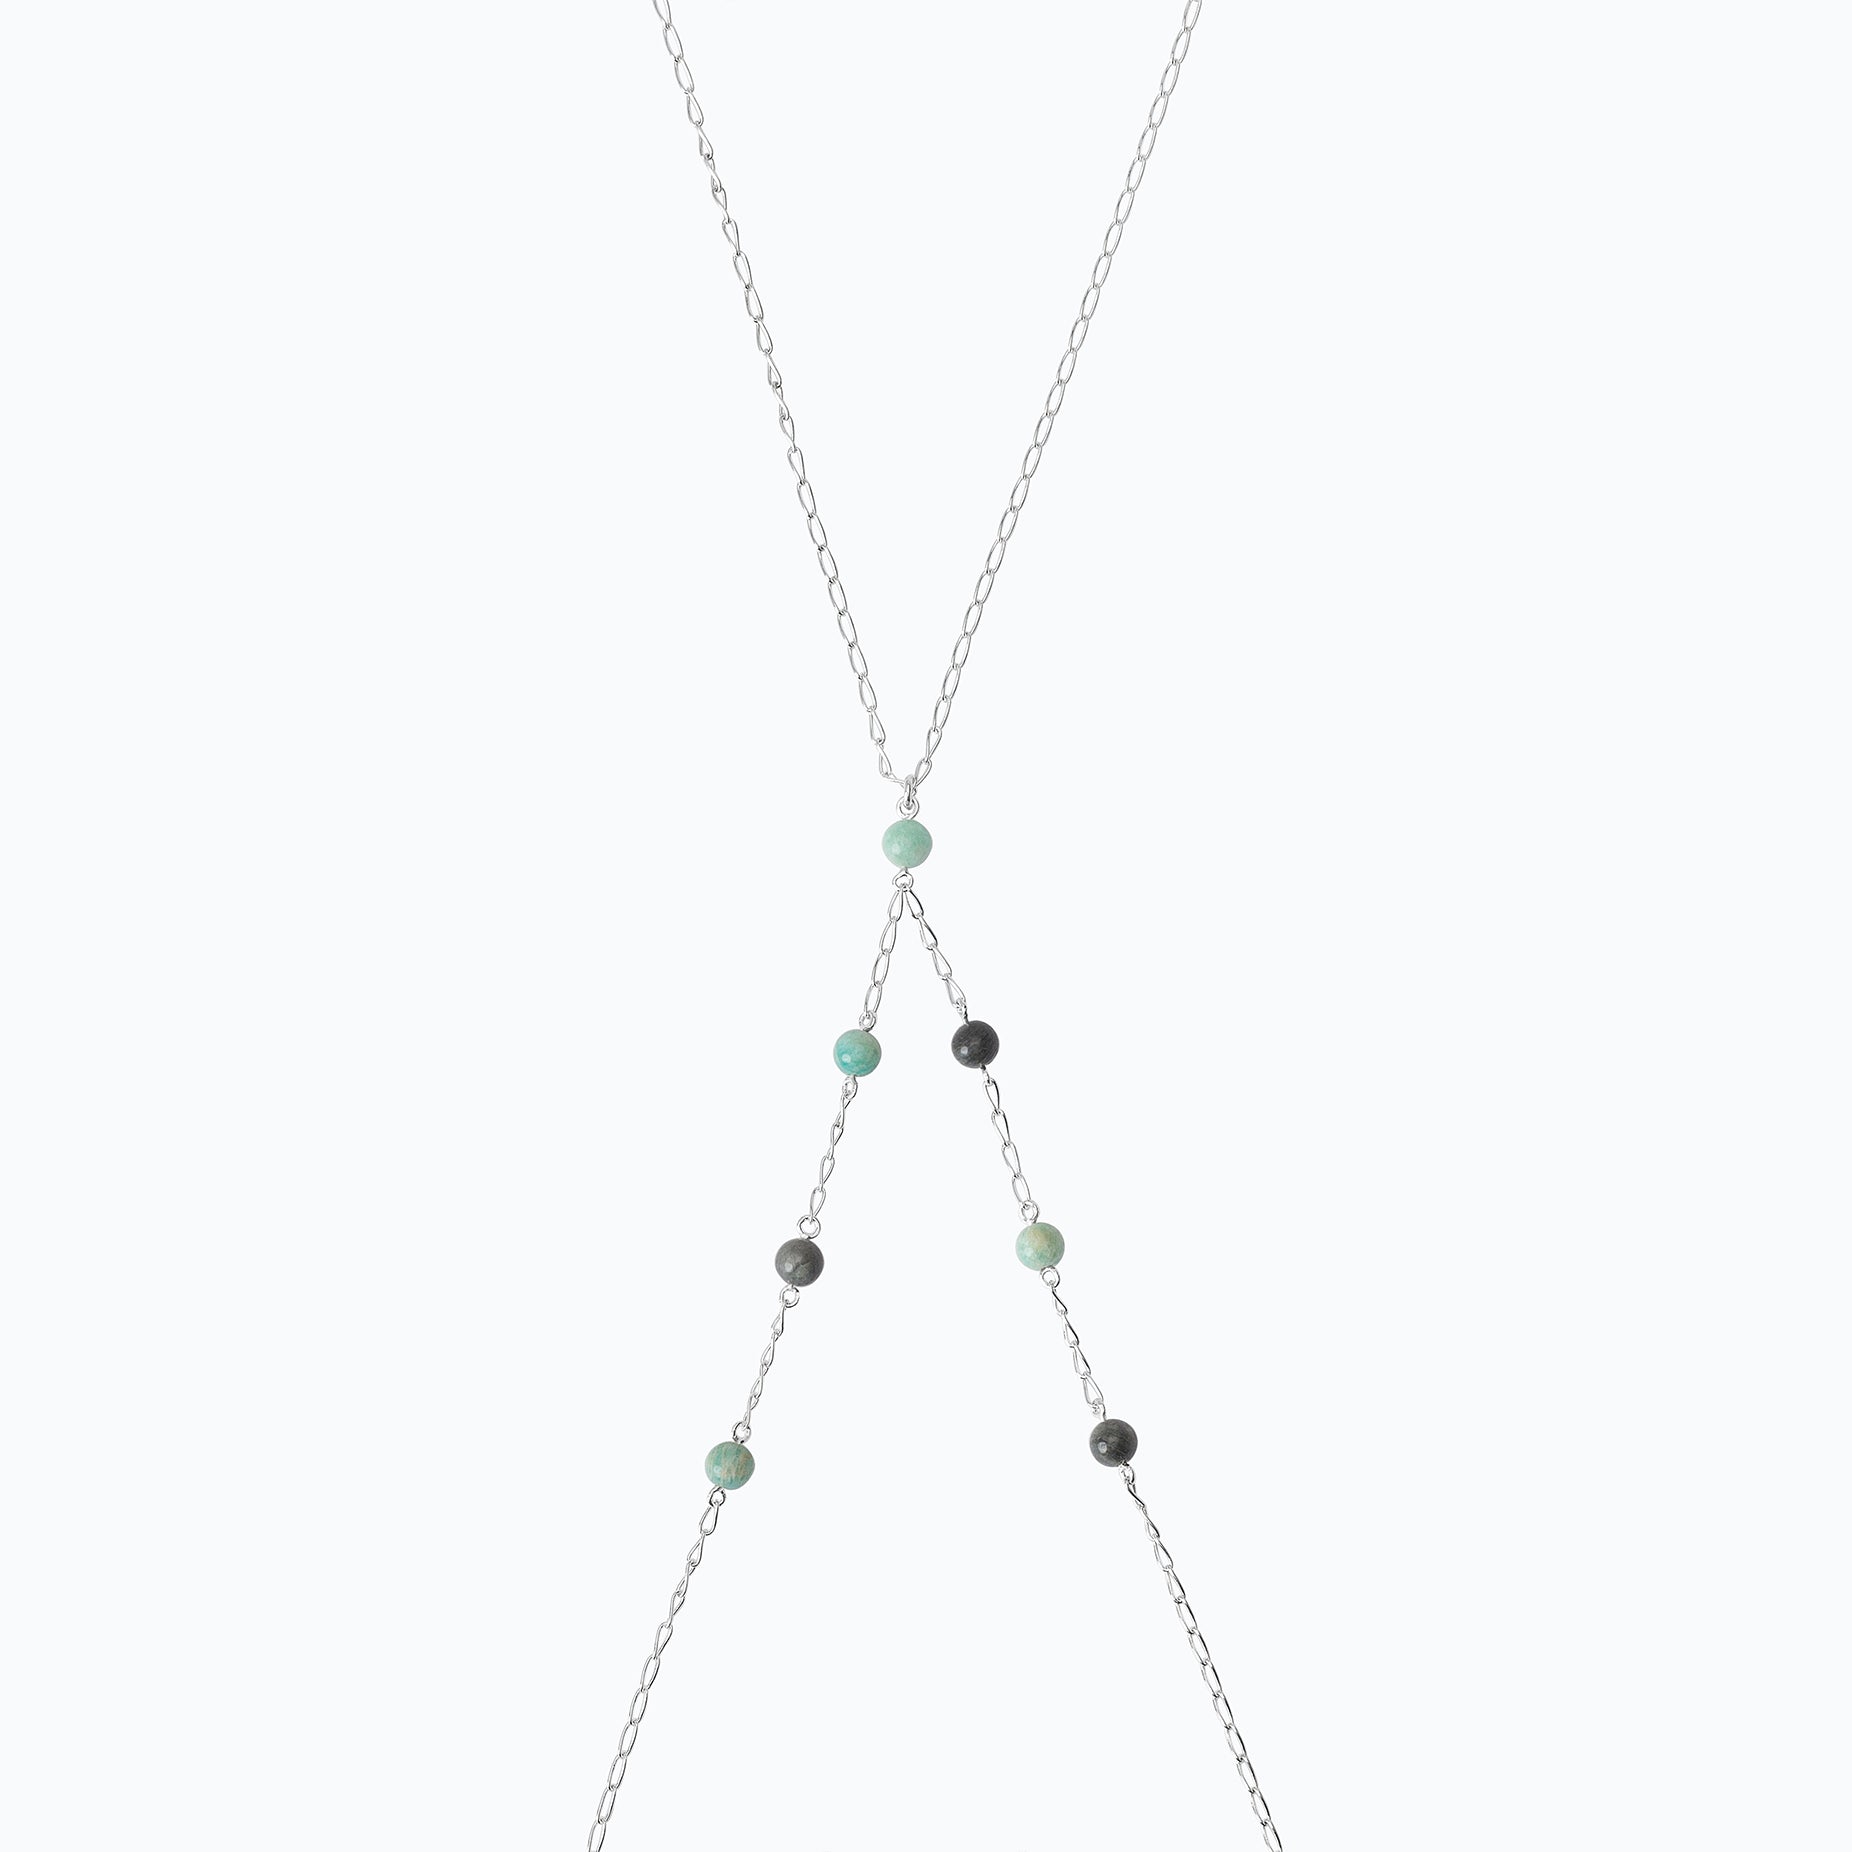 TULUM BY TANE BODY NECKLACE